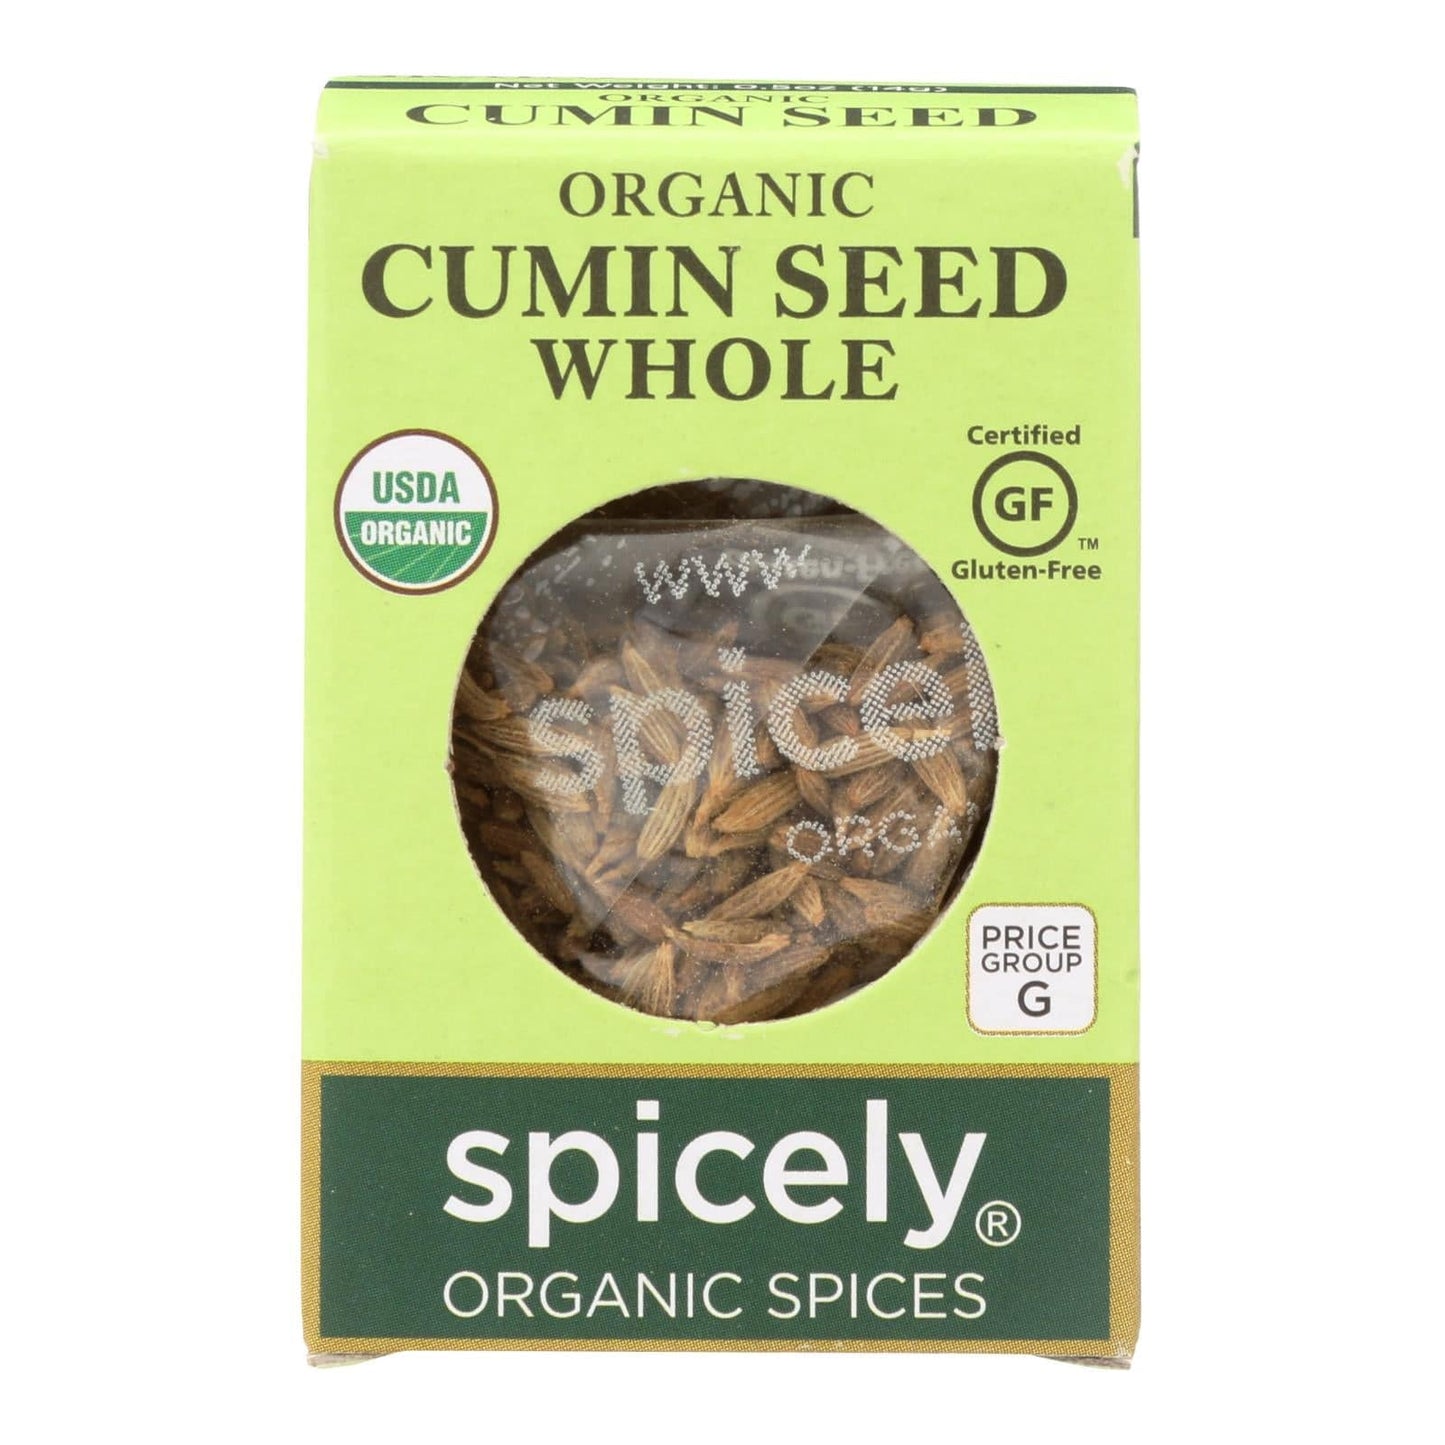 Buy Spicely Organics - Organic Cumin Seed - Whole - Case Of 6 - 0.5 Oz.  at OnlyNaturals.us